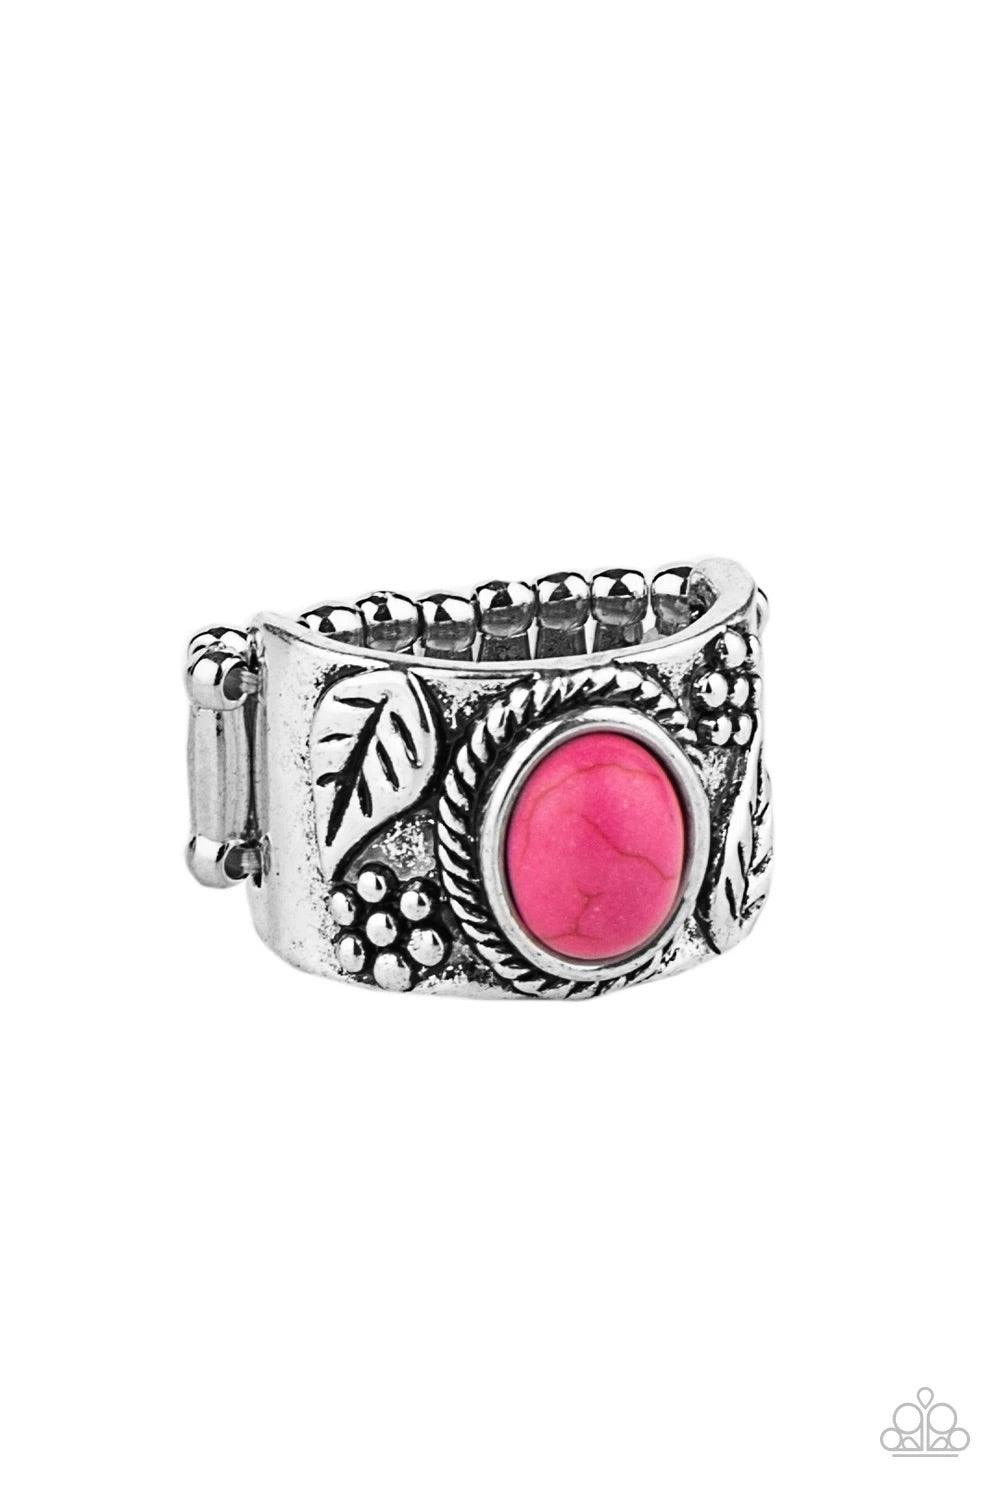 Paparazzi Accessories Free-Spirit med Fields - Pink Embossed in leafy floral patterns, the center of a thick silver band is adorned with an oval pink stone for a seasonal flair. Features a stretchy band for a flexible fit. Sold as one individual ring. Jew